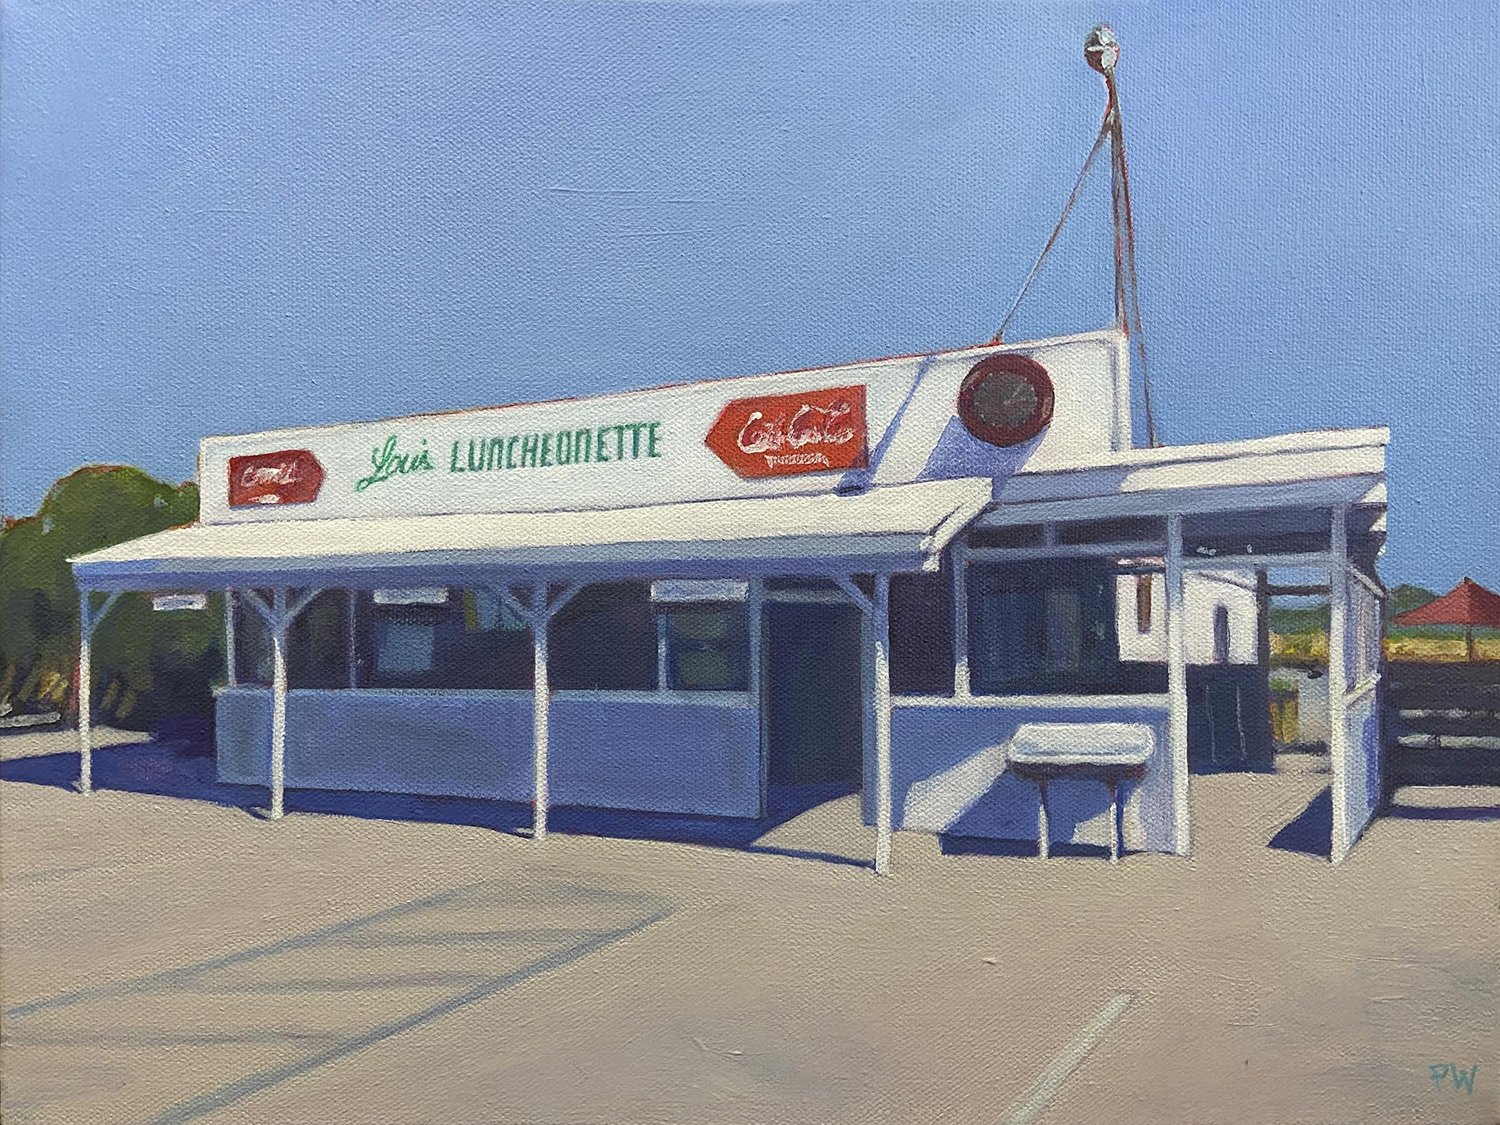 Lou's Luncheonette by Patrice Wachs